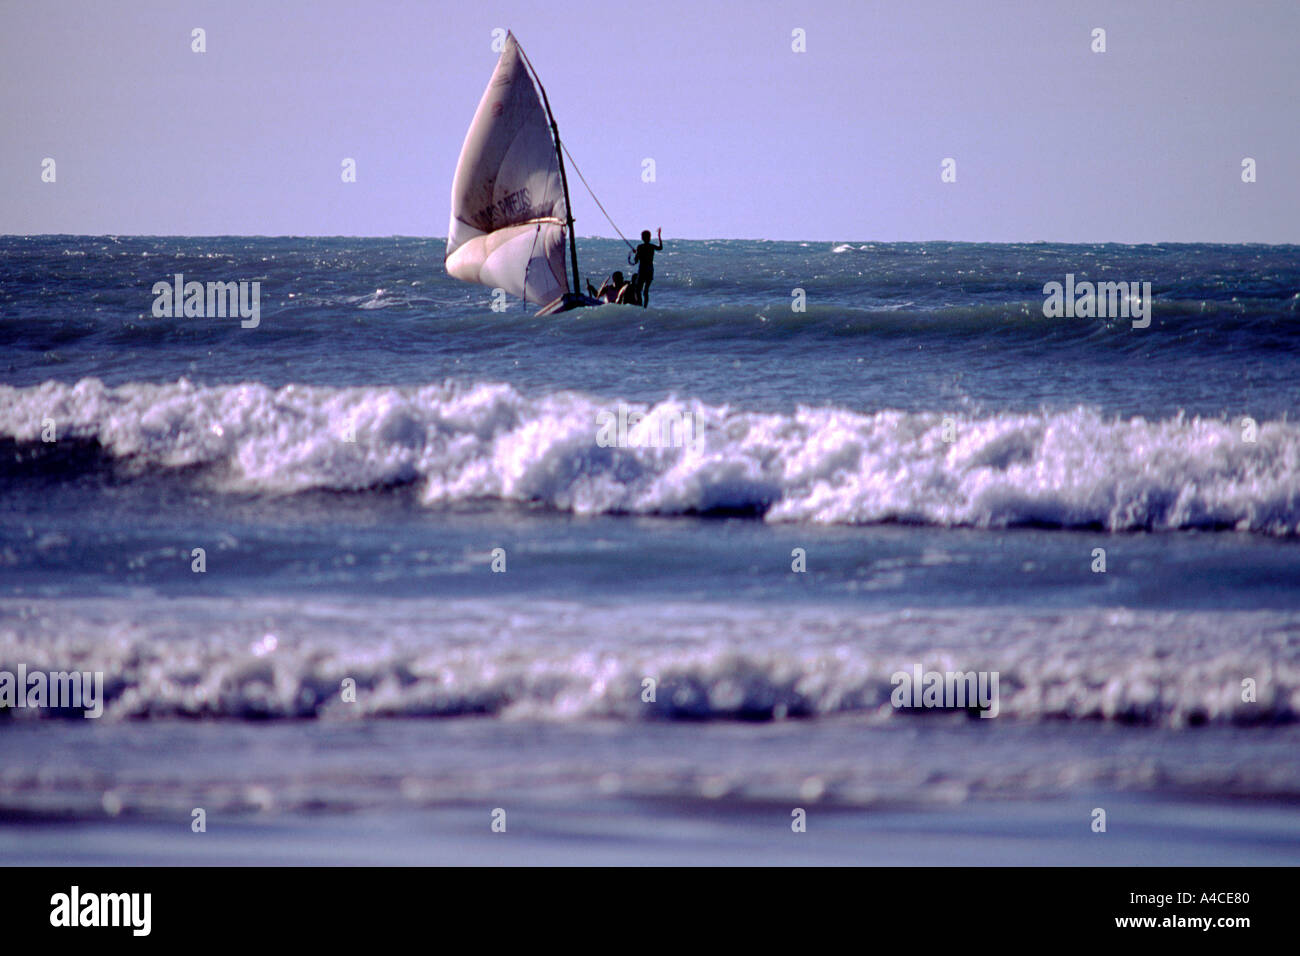 Sail boat crossing the waves Brazil Stock Photo